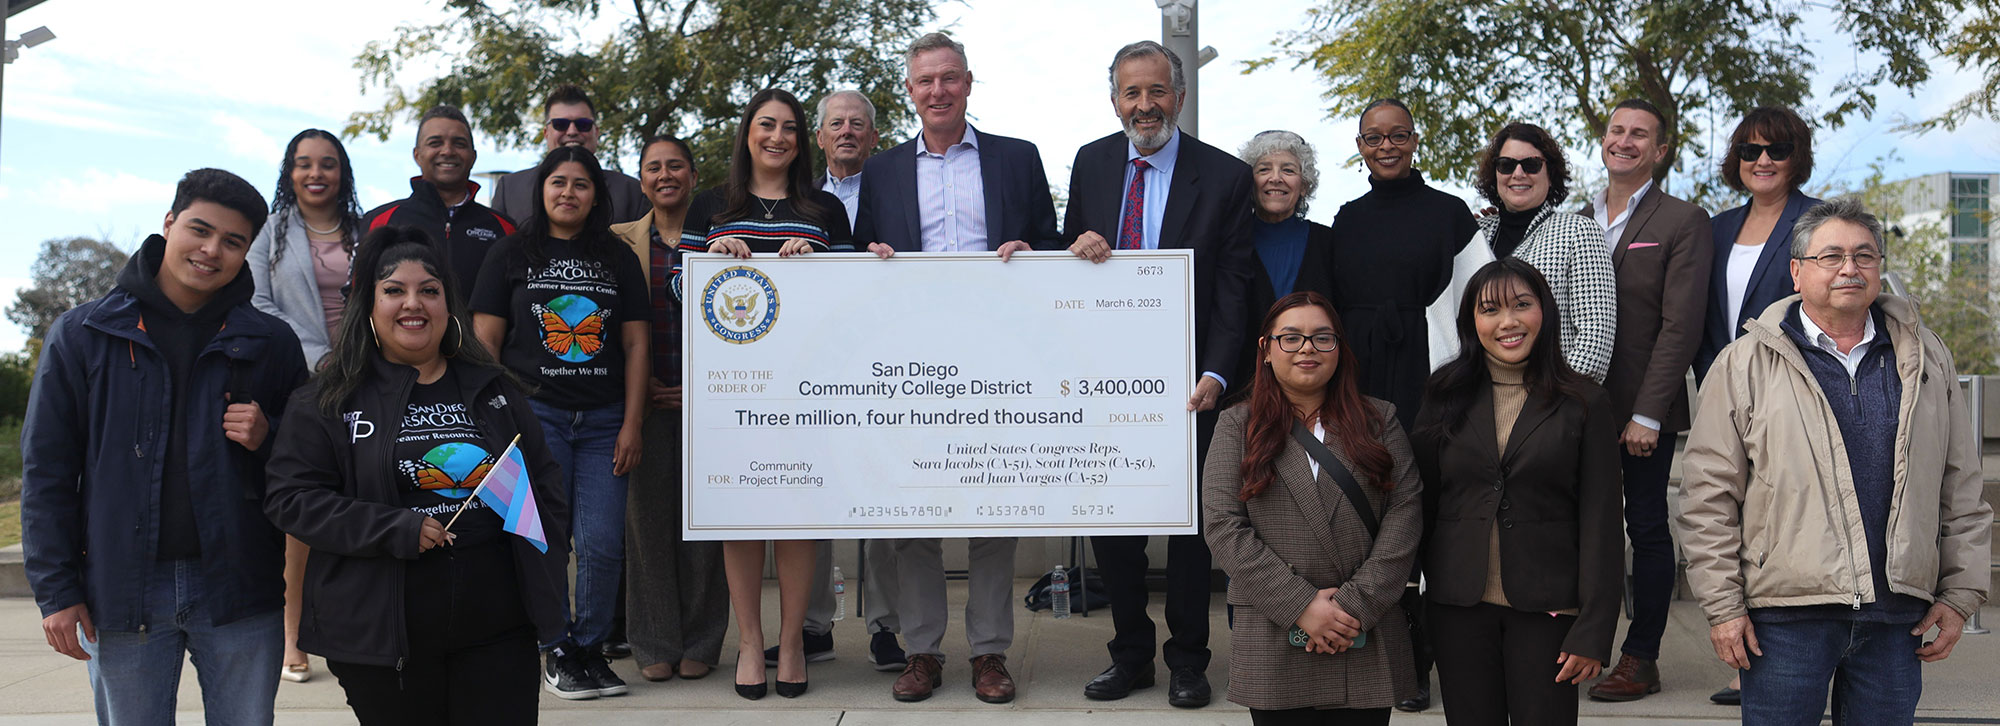 A group photo with the representatives, district officials and students with a giant check for 3.4 million dollars